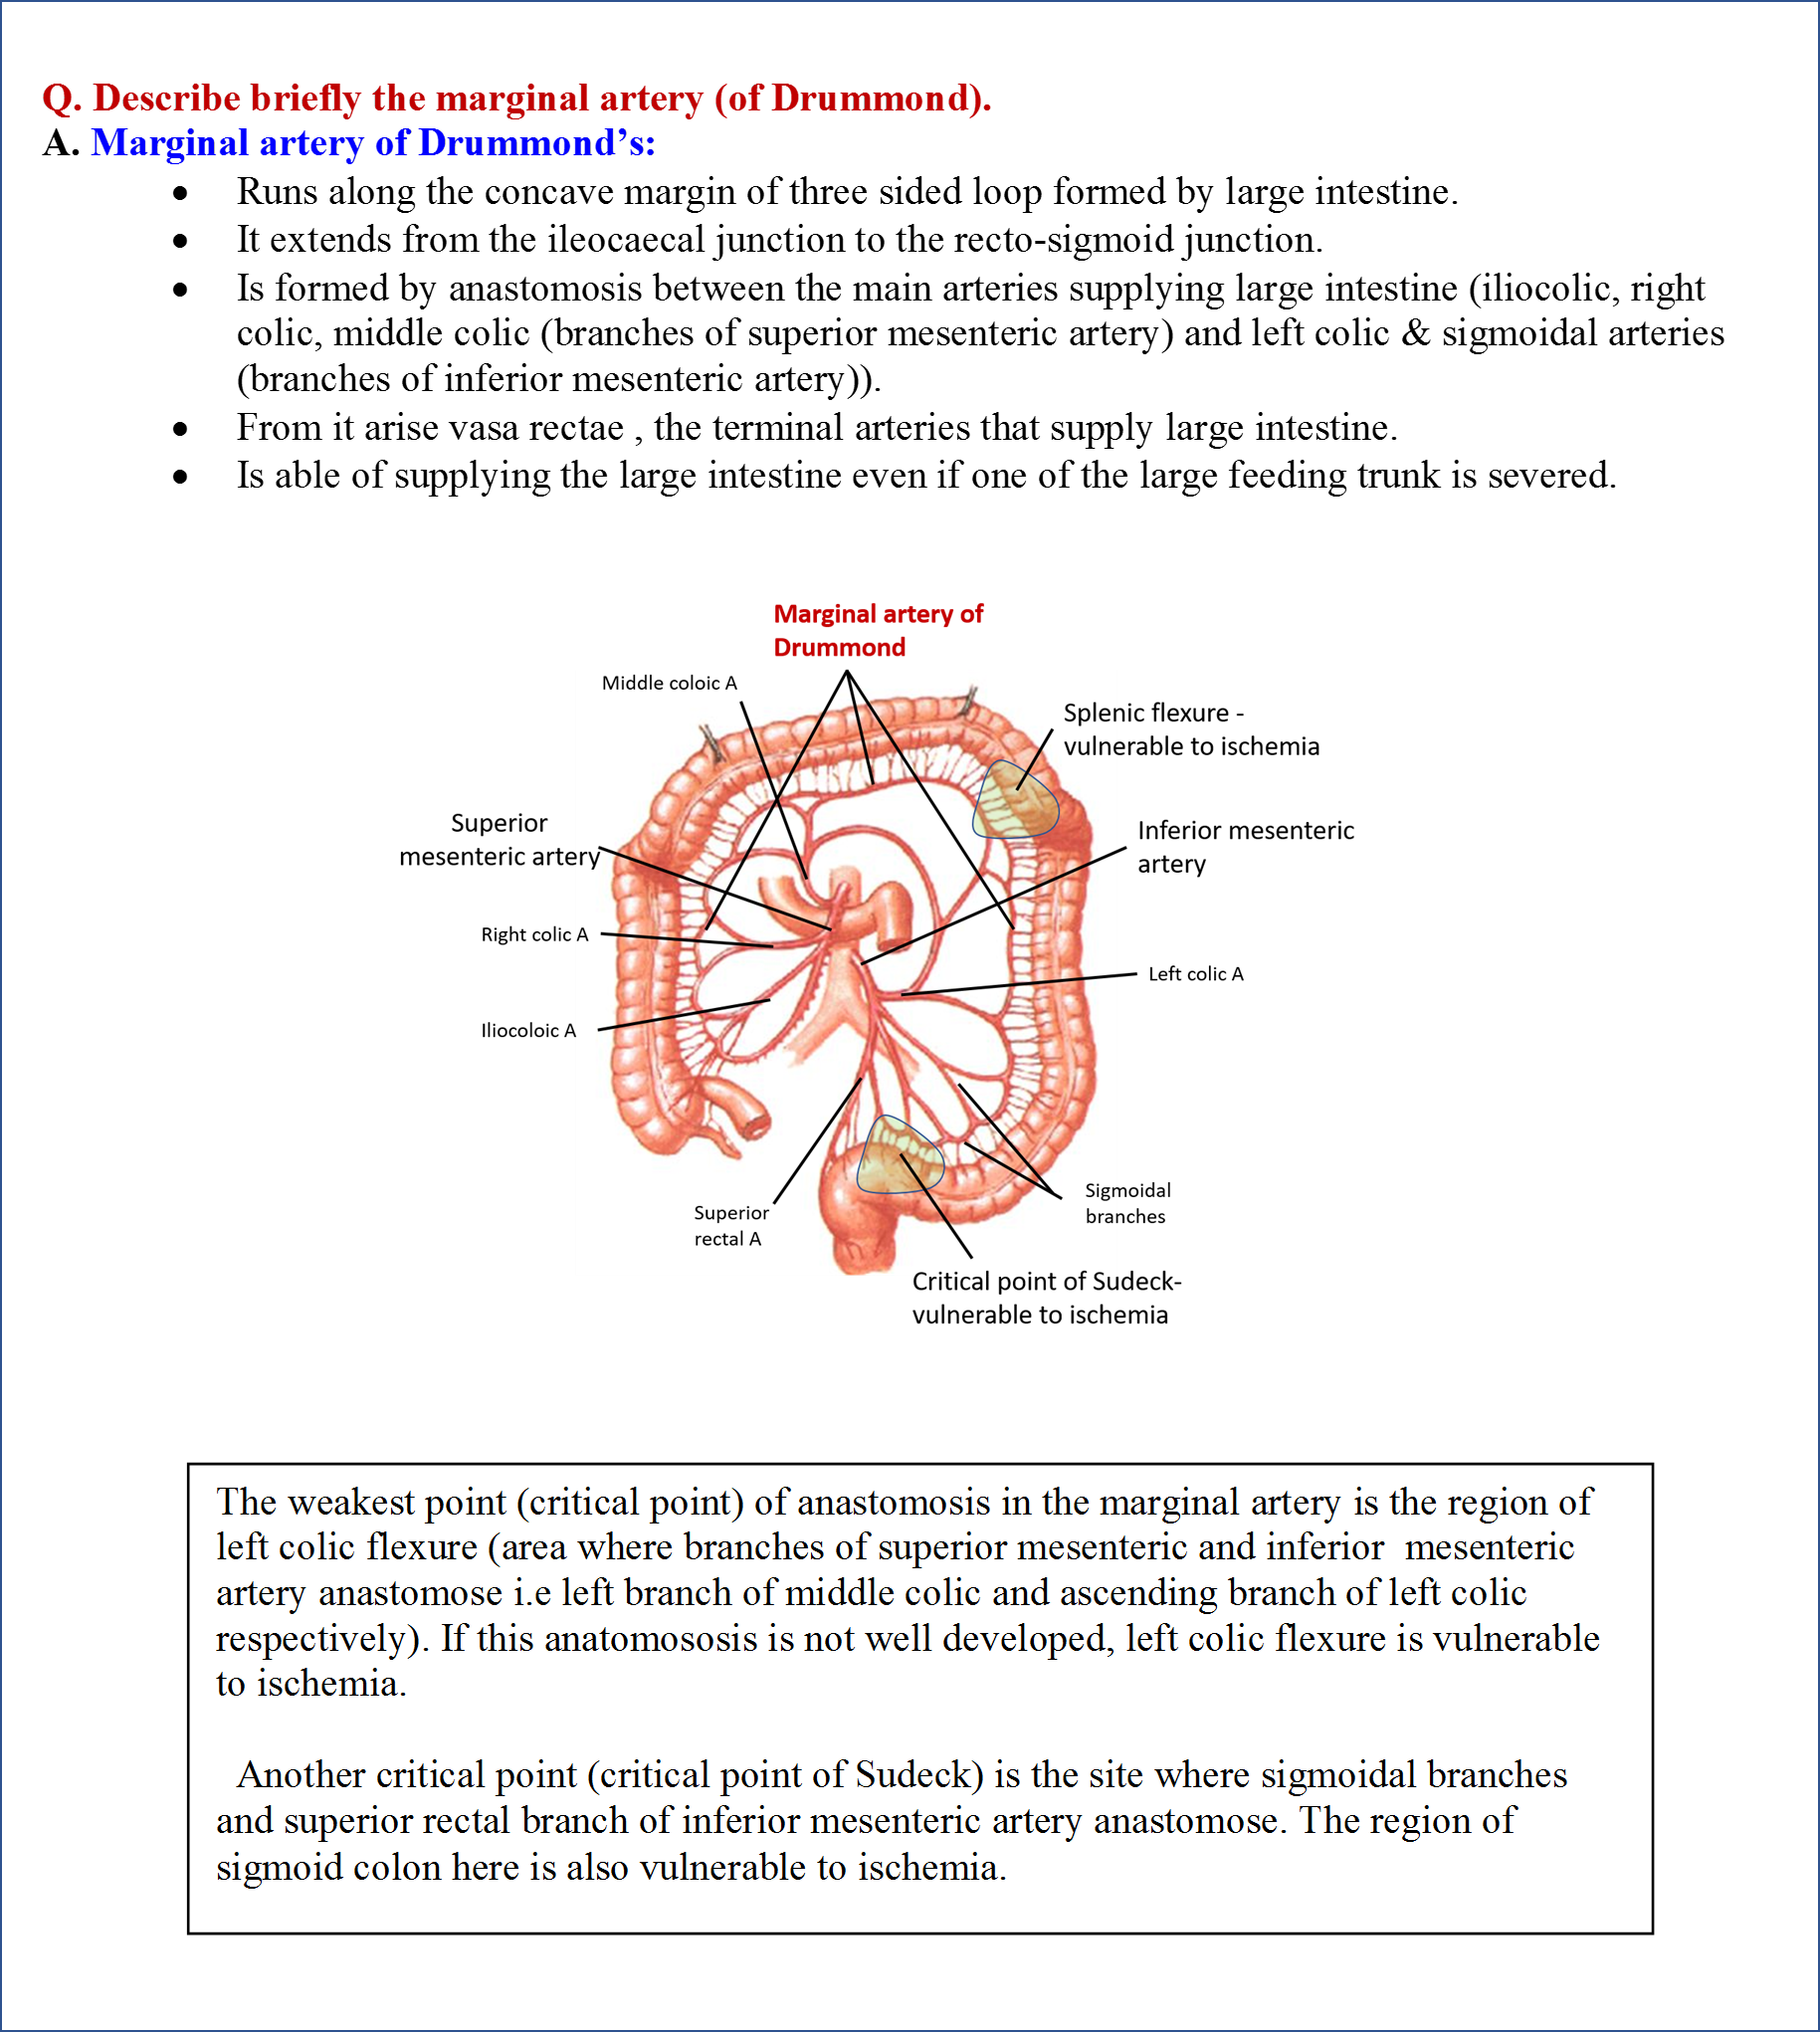 Formation of Marginal Artery of Drummond and Critical Points